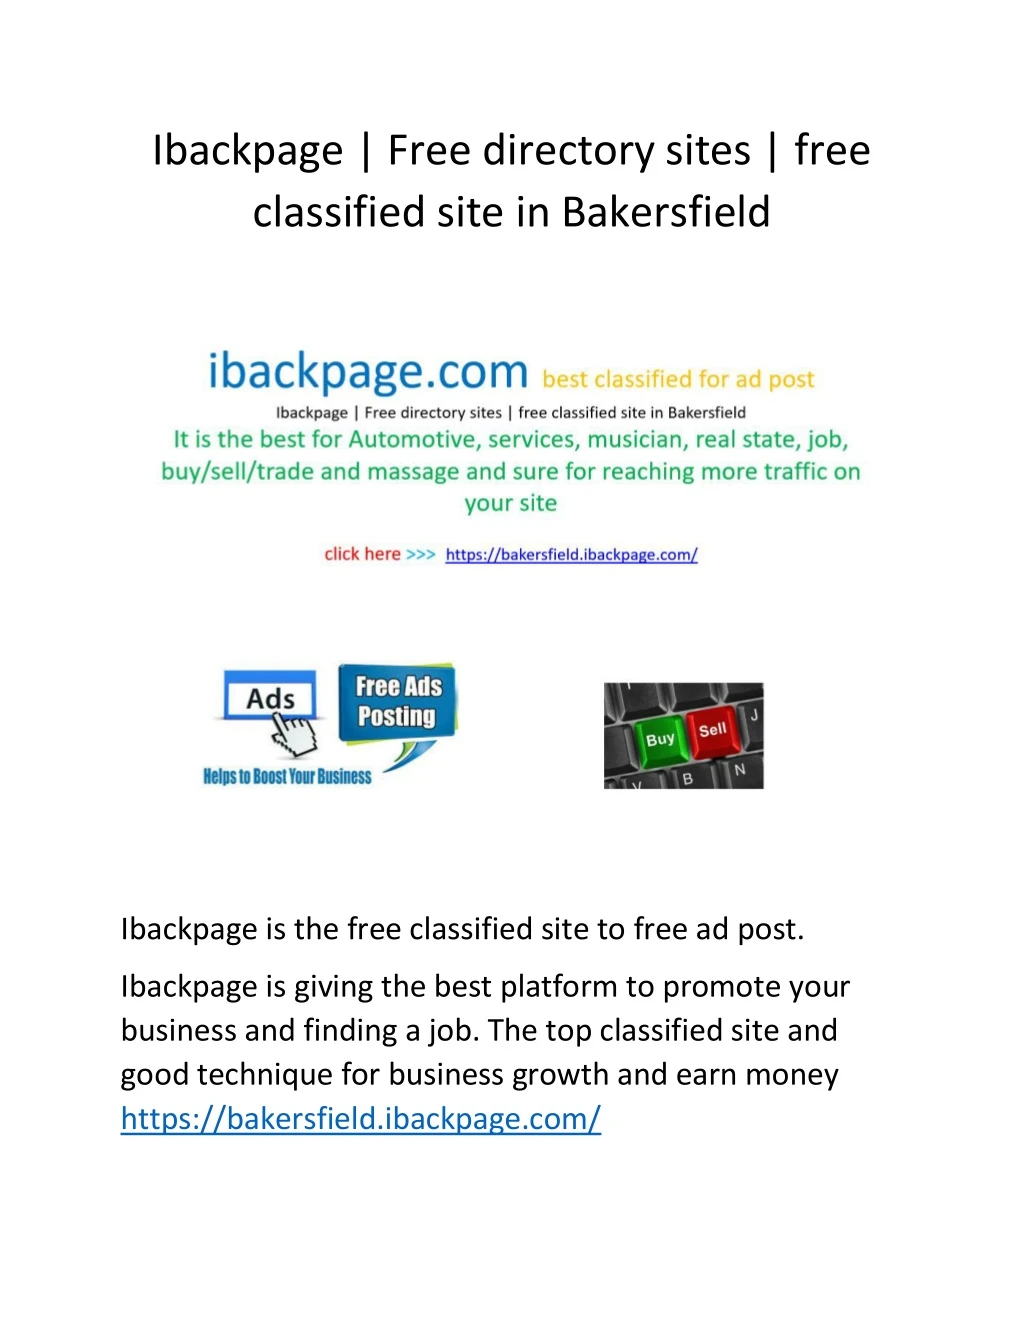 ibackpage free directory sites free classified